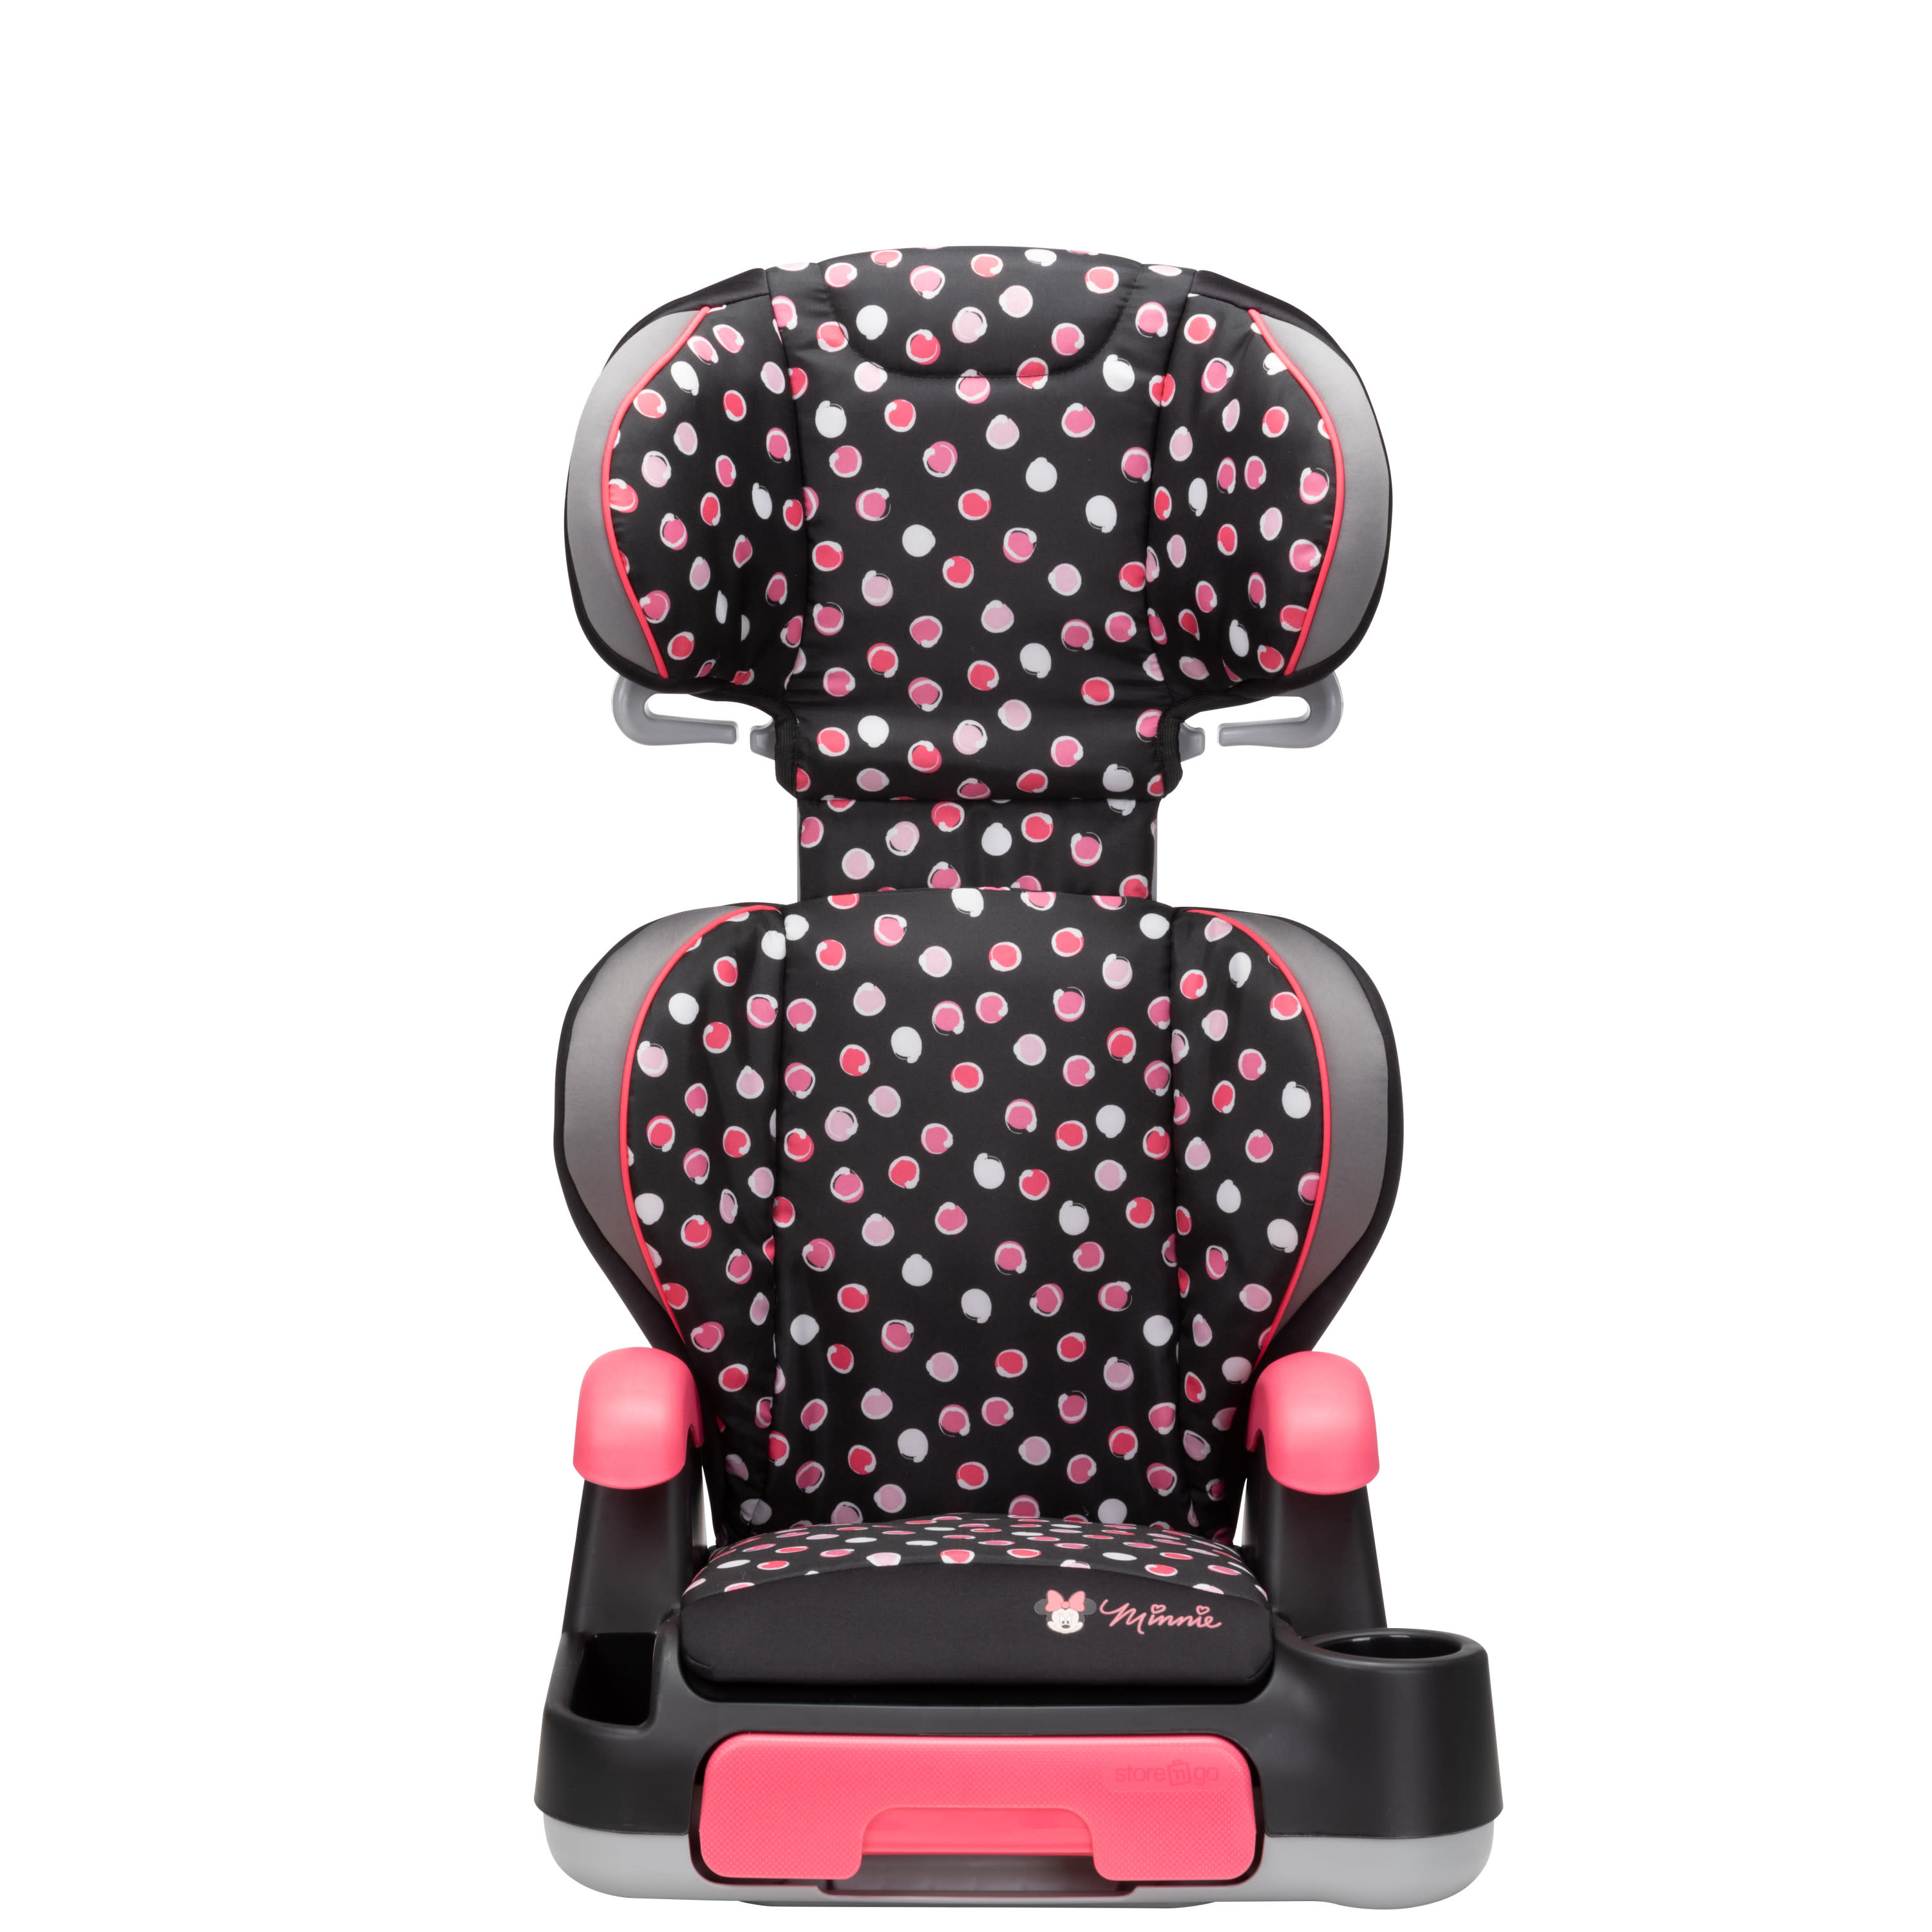 Disney Baby Store 'n Go Sport Booster Car Seat, Minnie Mash Up - image 7 of 21